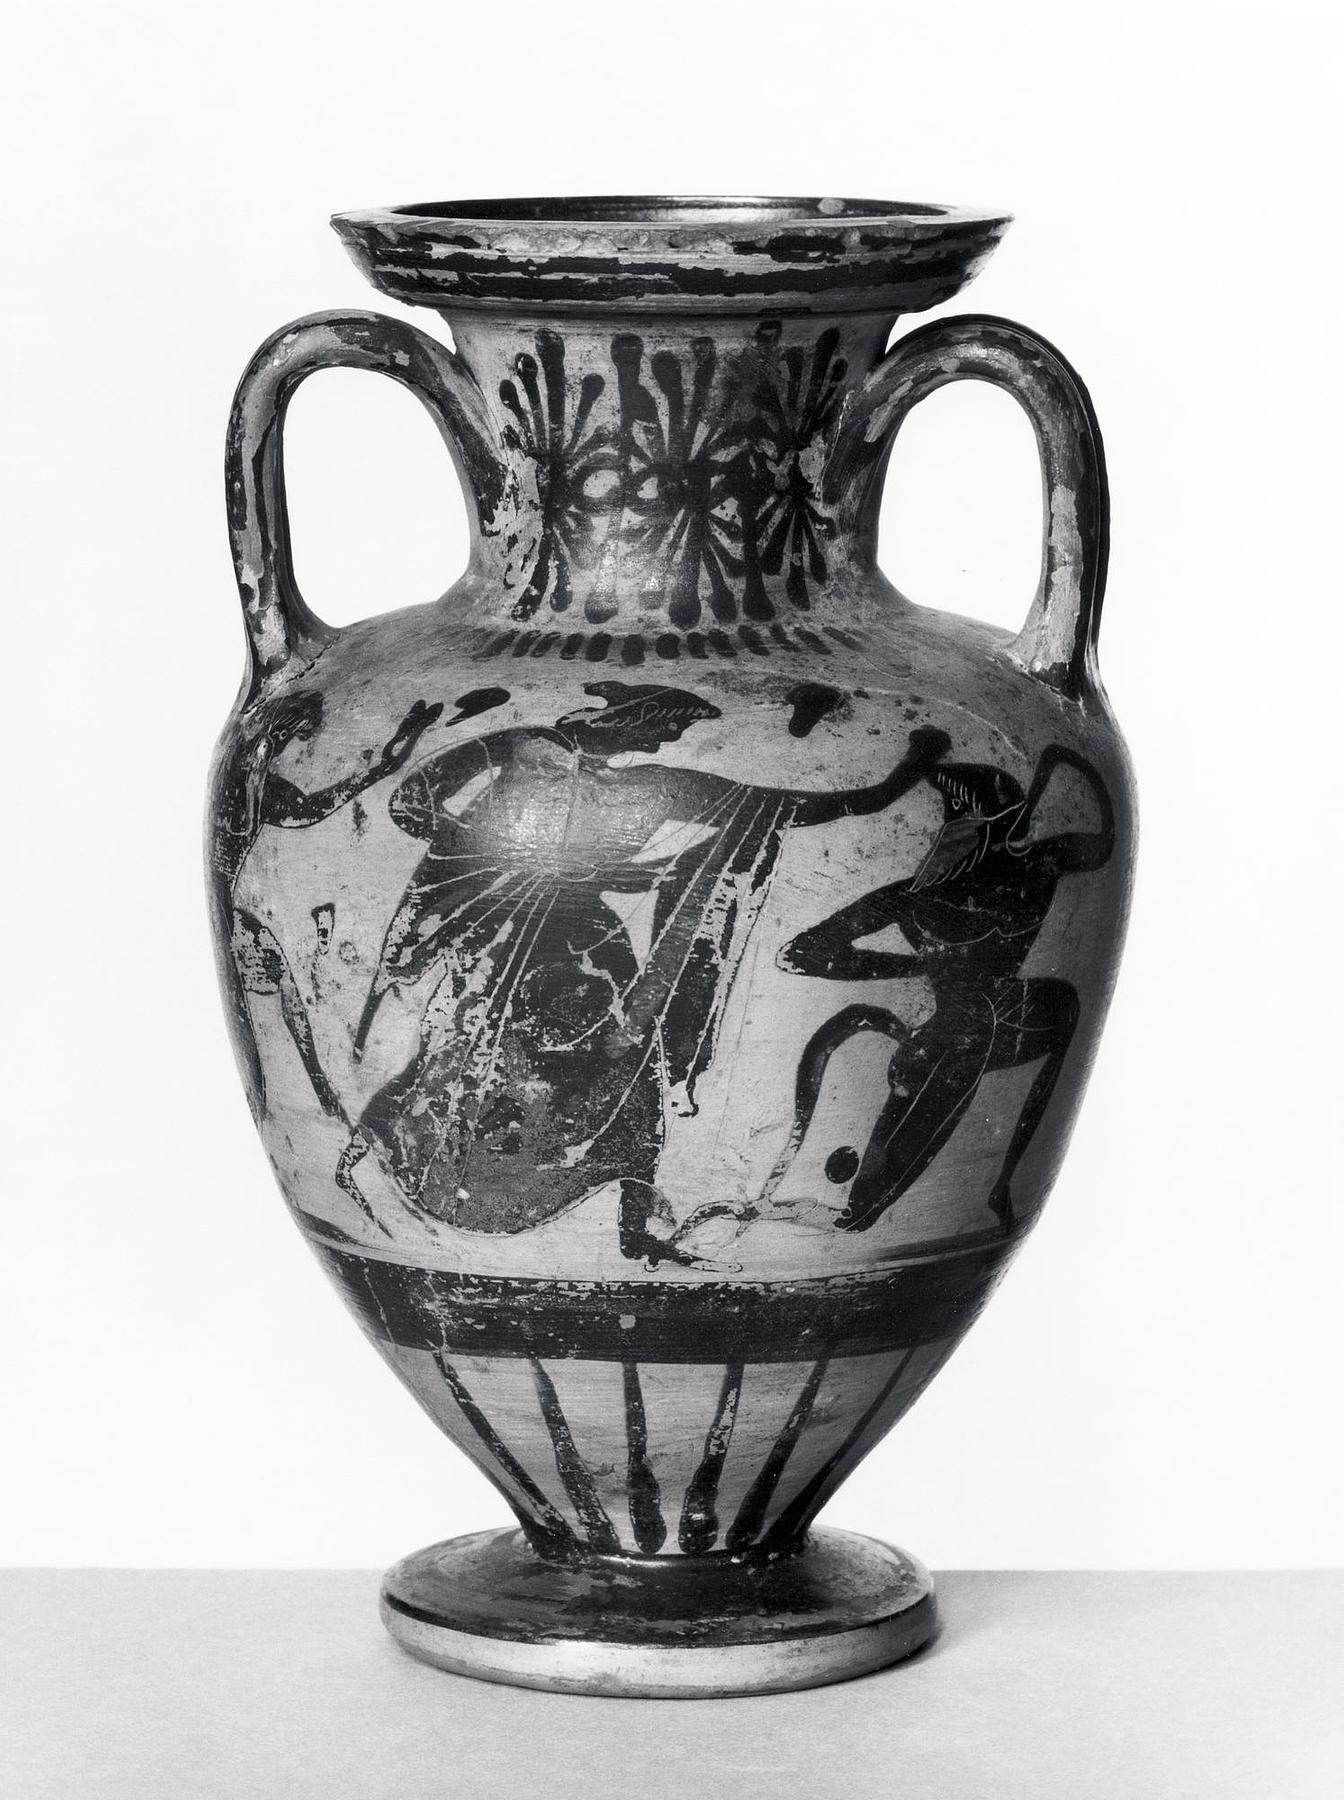 Amphora with sileni and maenads dancing (A) and warriors in battle (B), H530